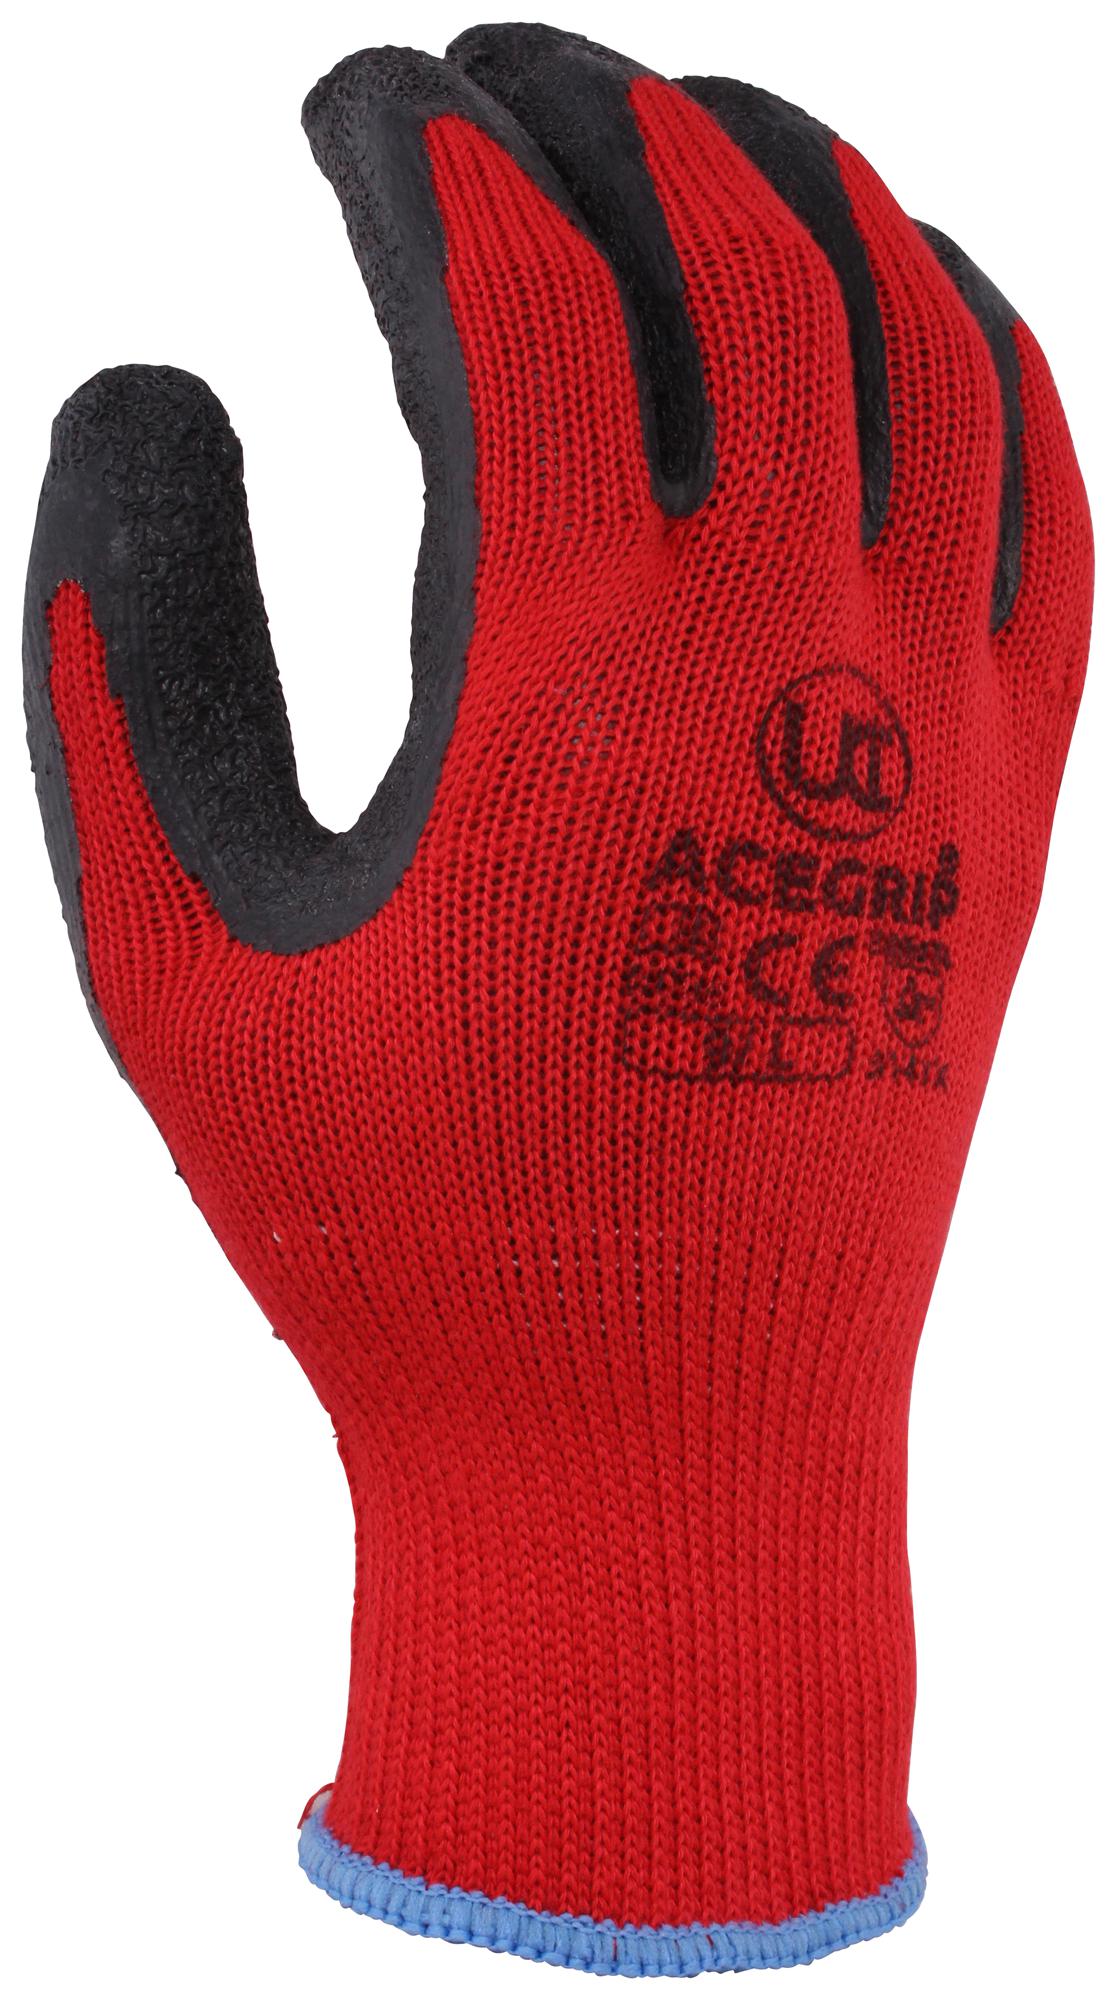 Uci G/acegrip-Rp/red/07 Gloves, Polycotton Liner, Red, S